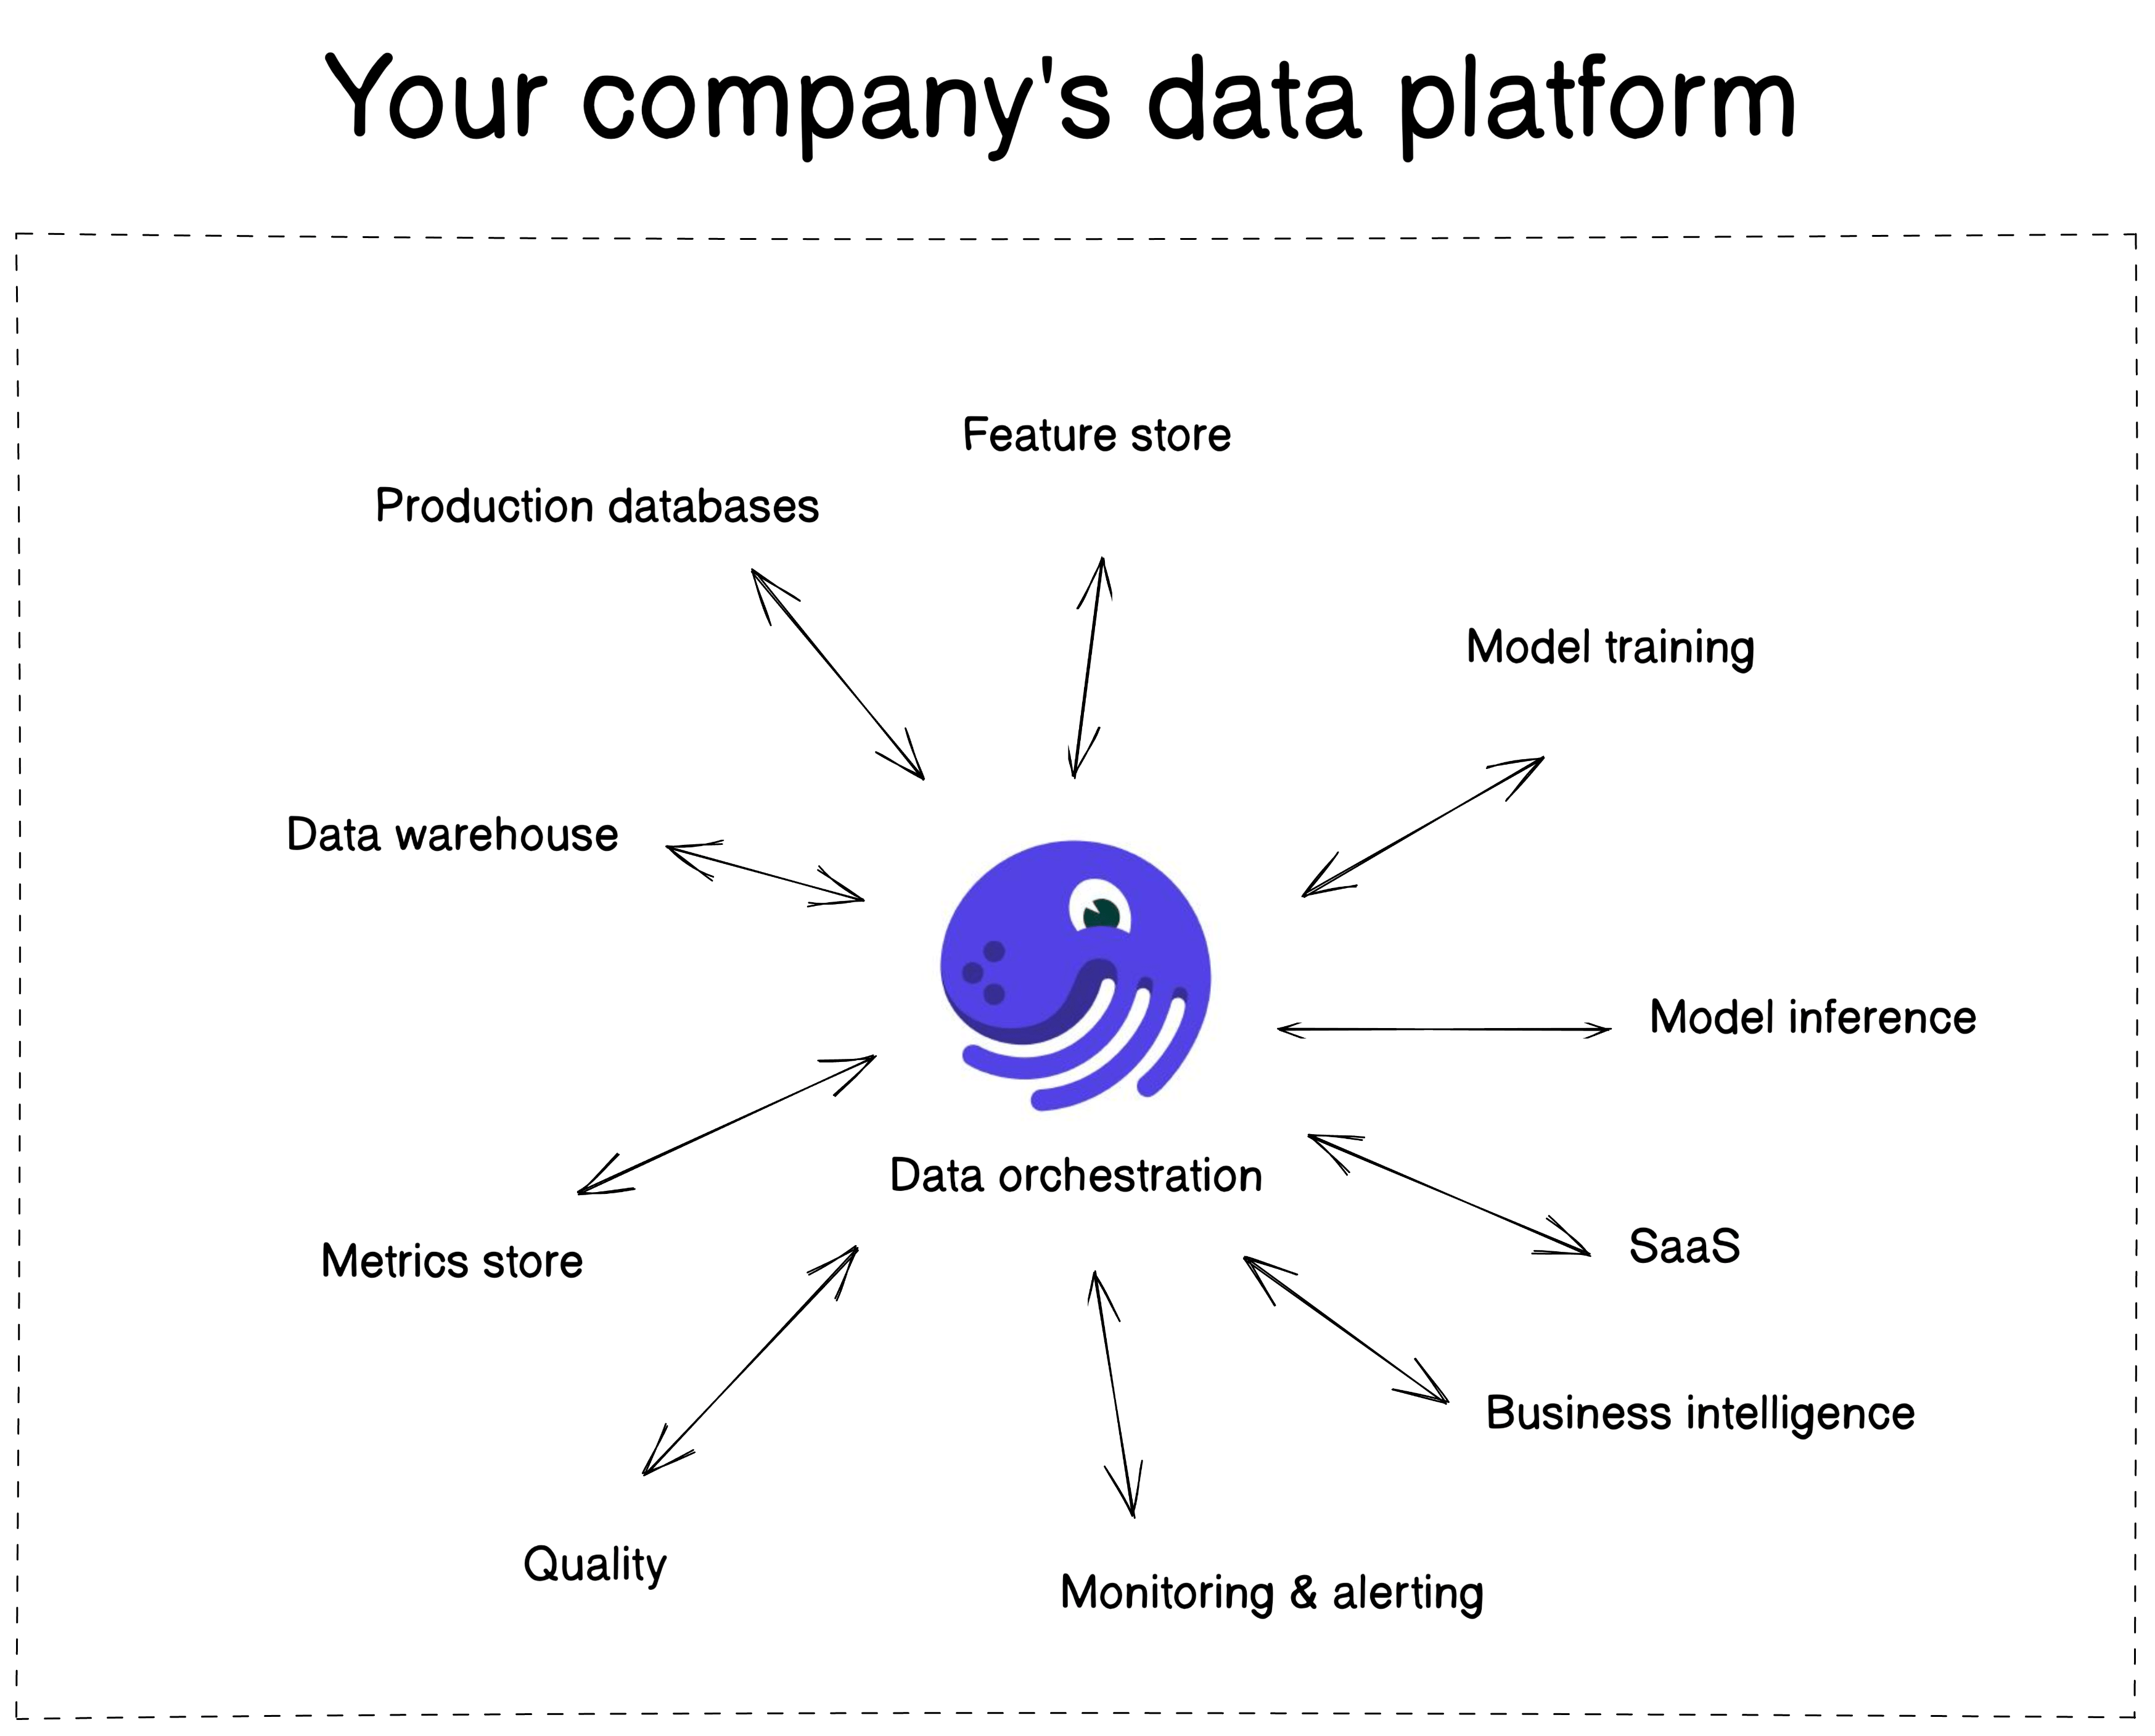 An illustration of a company's data platform with the data orchestration layer at its center.